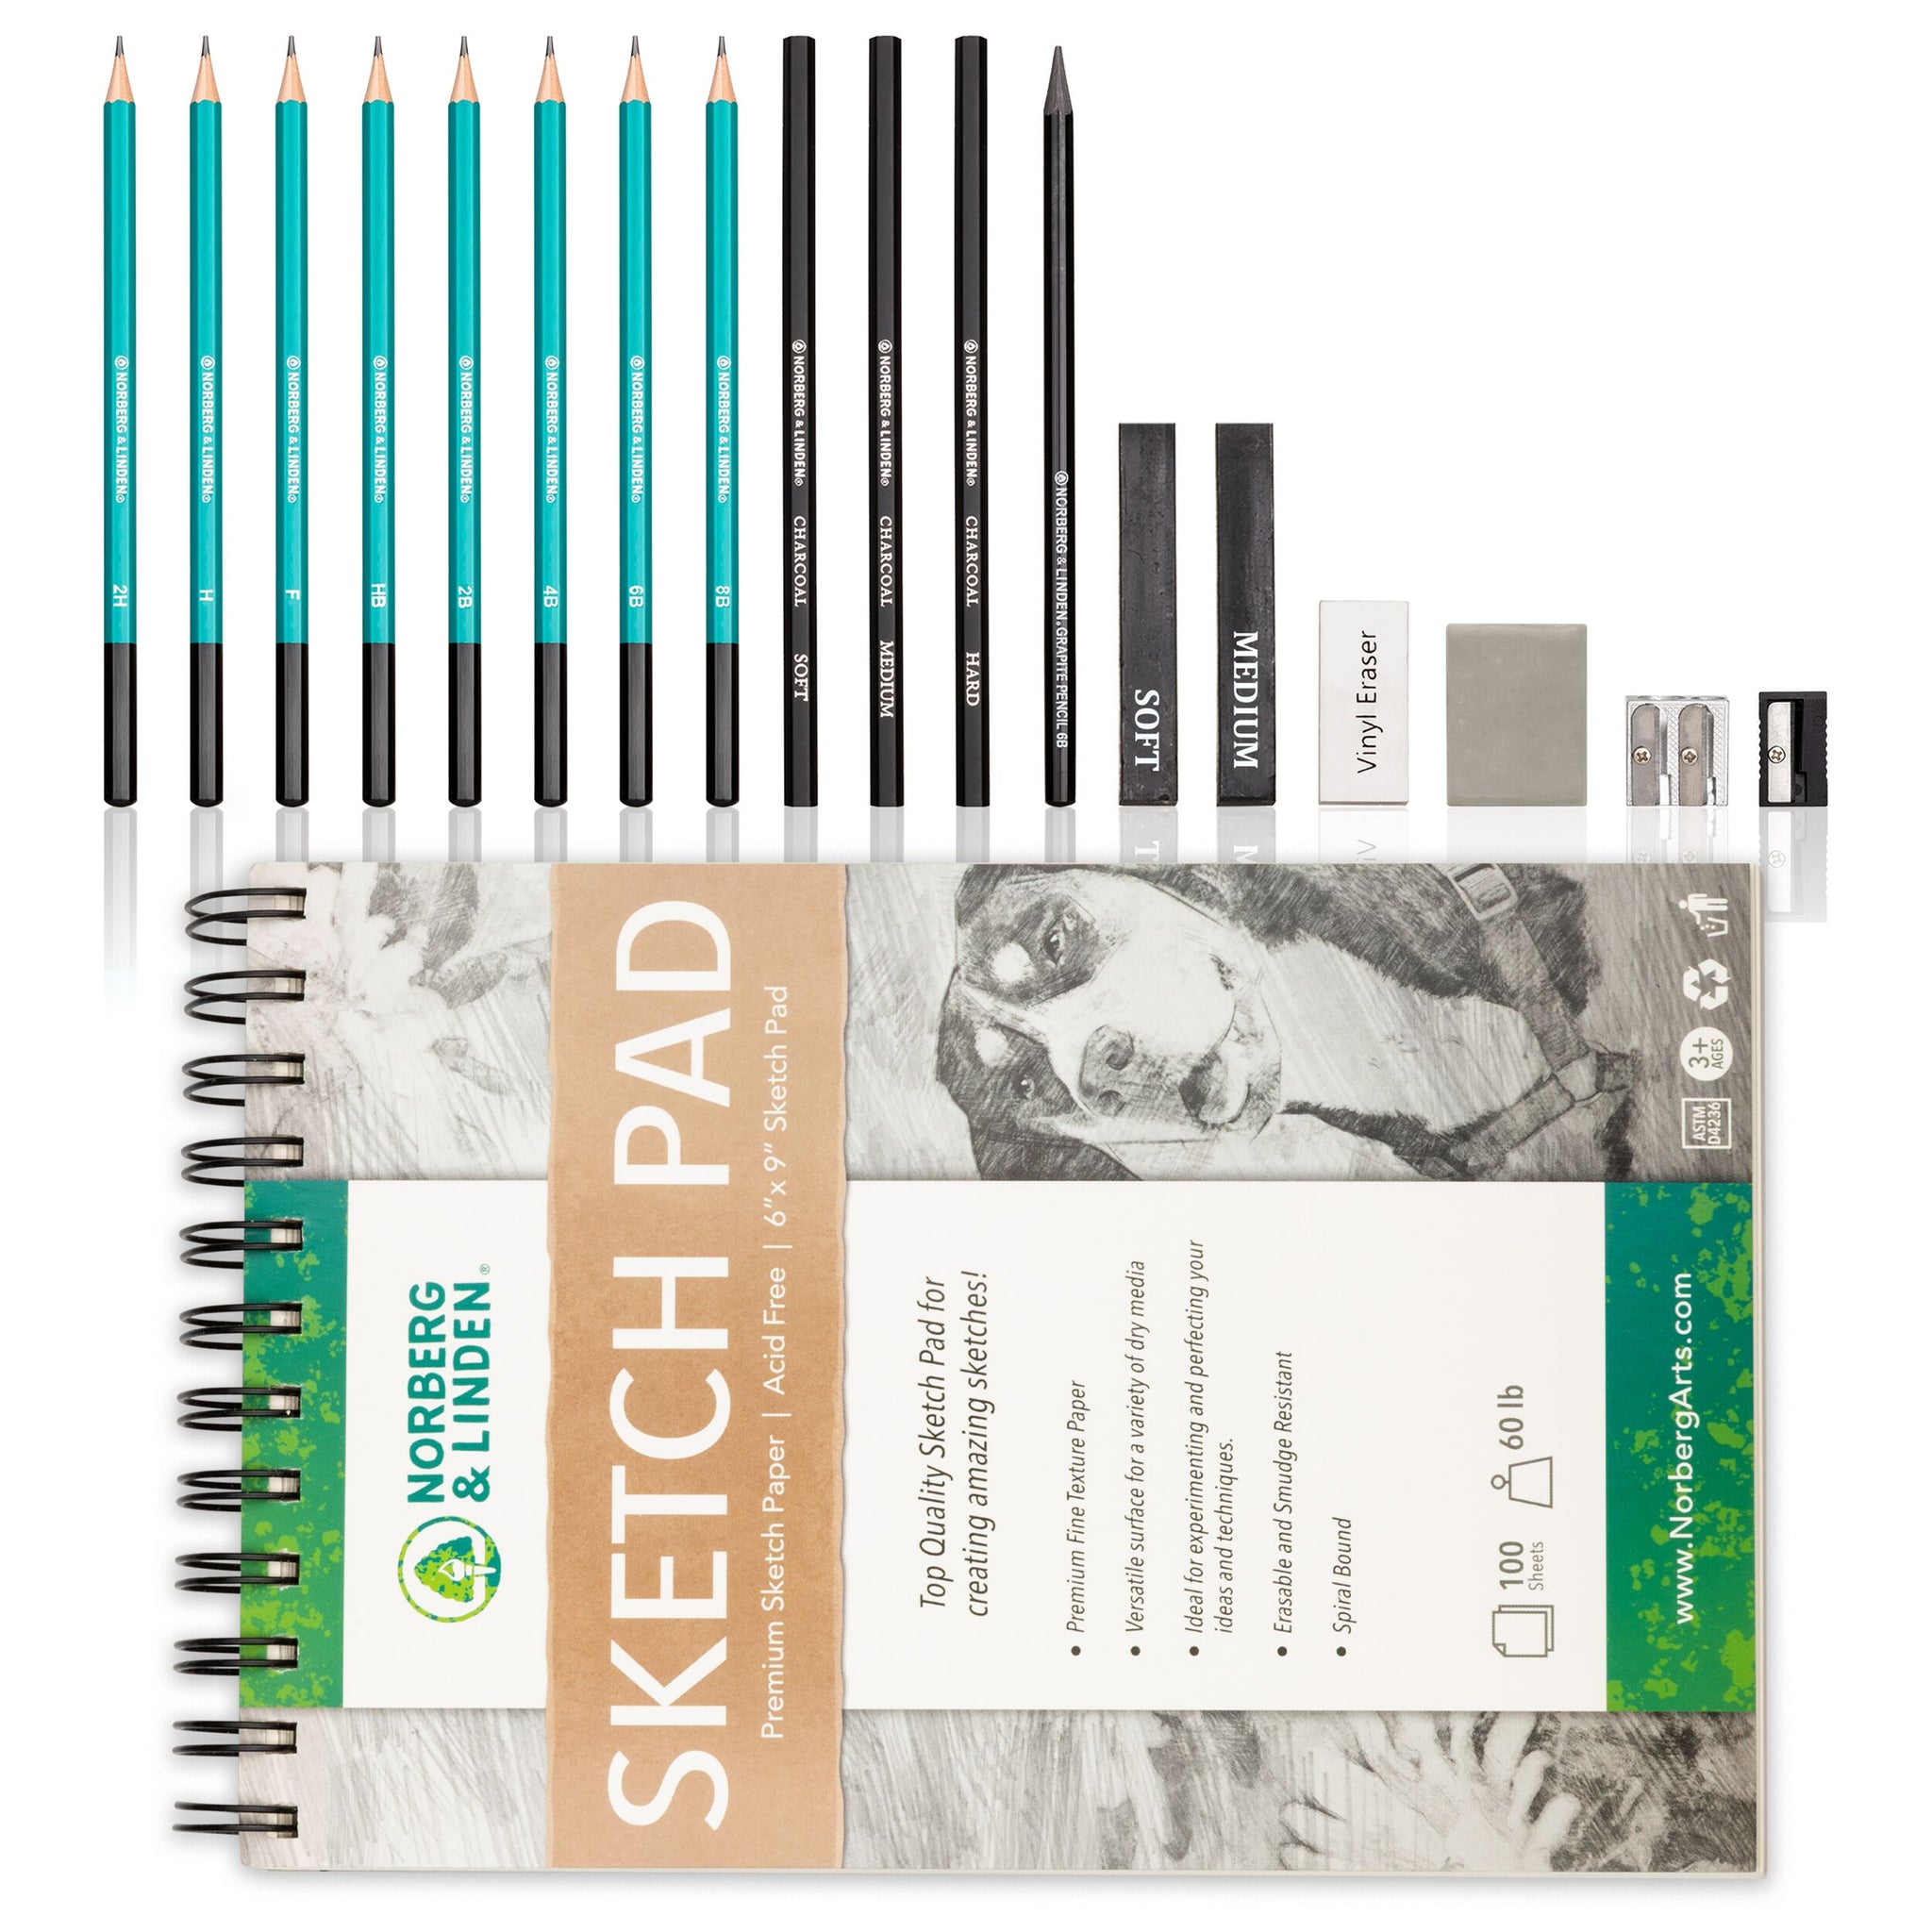 Norberg & Linden Drawing Set - Sketching and Charcoal Pencils - 100 Page  Drawing Pad, Kneaded Eraser. Art Kit and Supplies for Kids, Teens and Adults